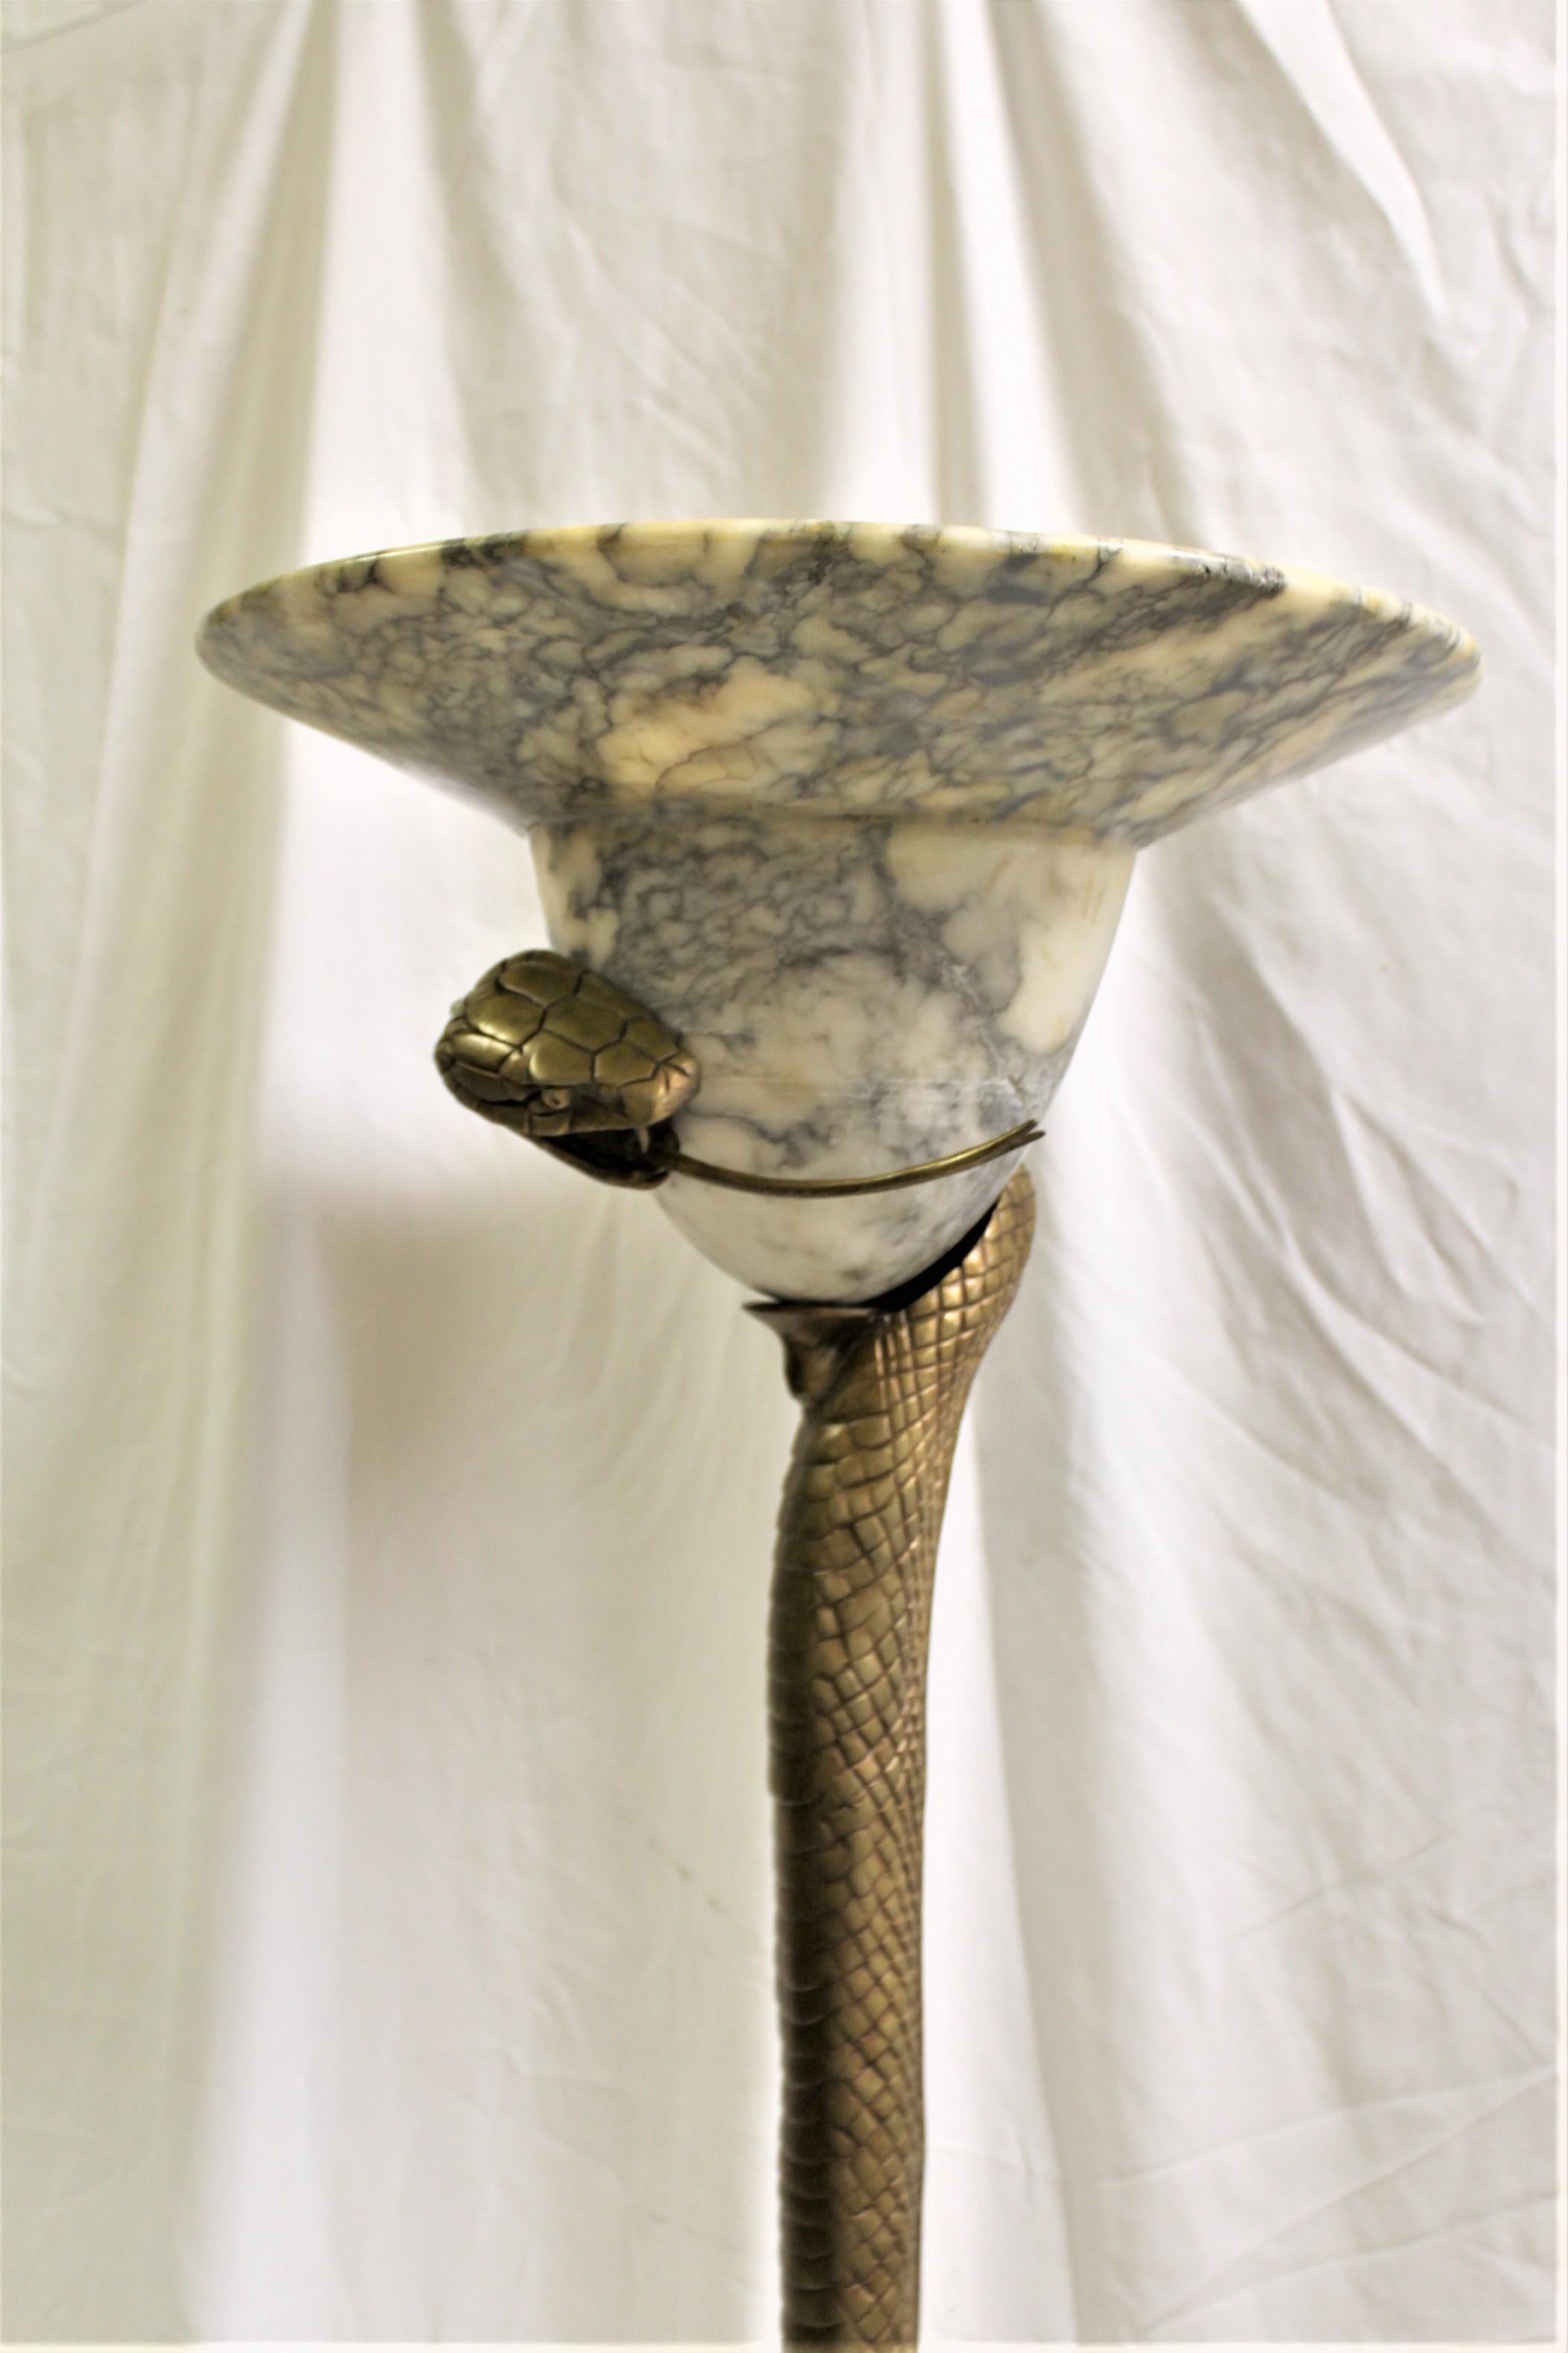 This is the most popular Snake floor lamp designed by E. Brandt. A contemporary cast in bronze with a golden polished patina finish. Hi detailed casting with an older rare Alabaster shade from France. There are none like it around. Heavy and will